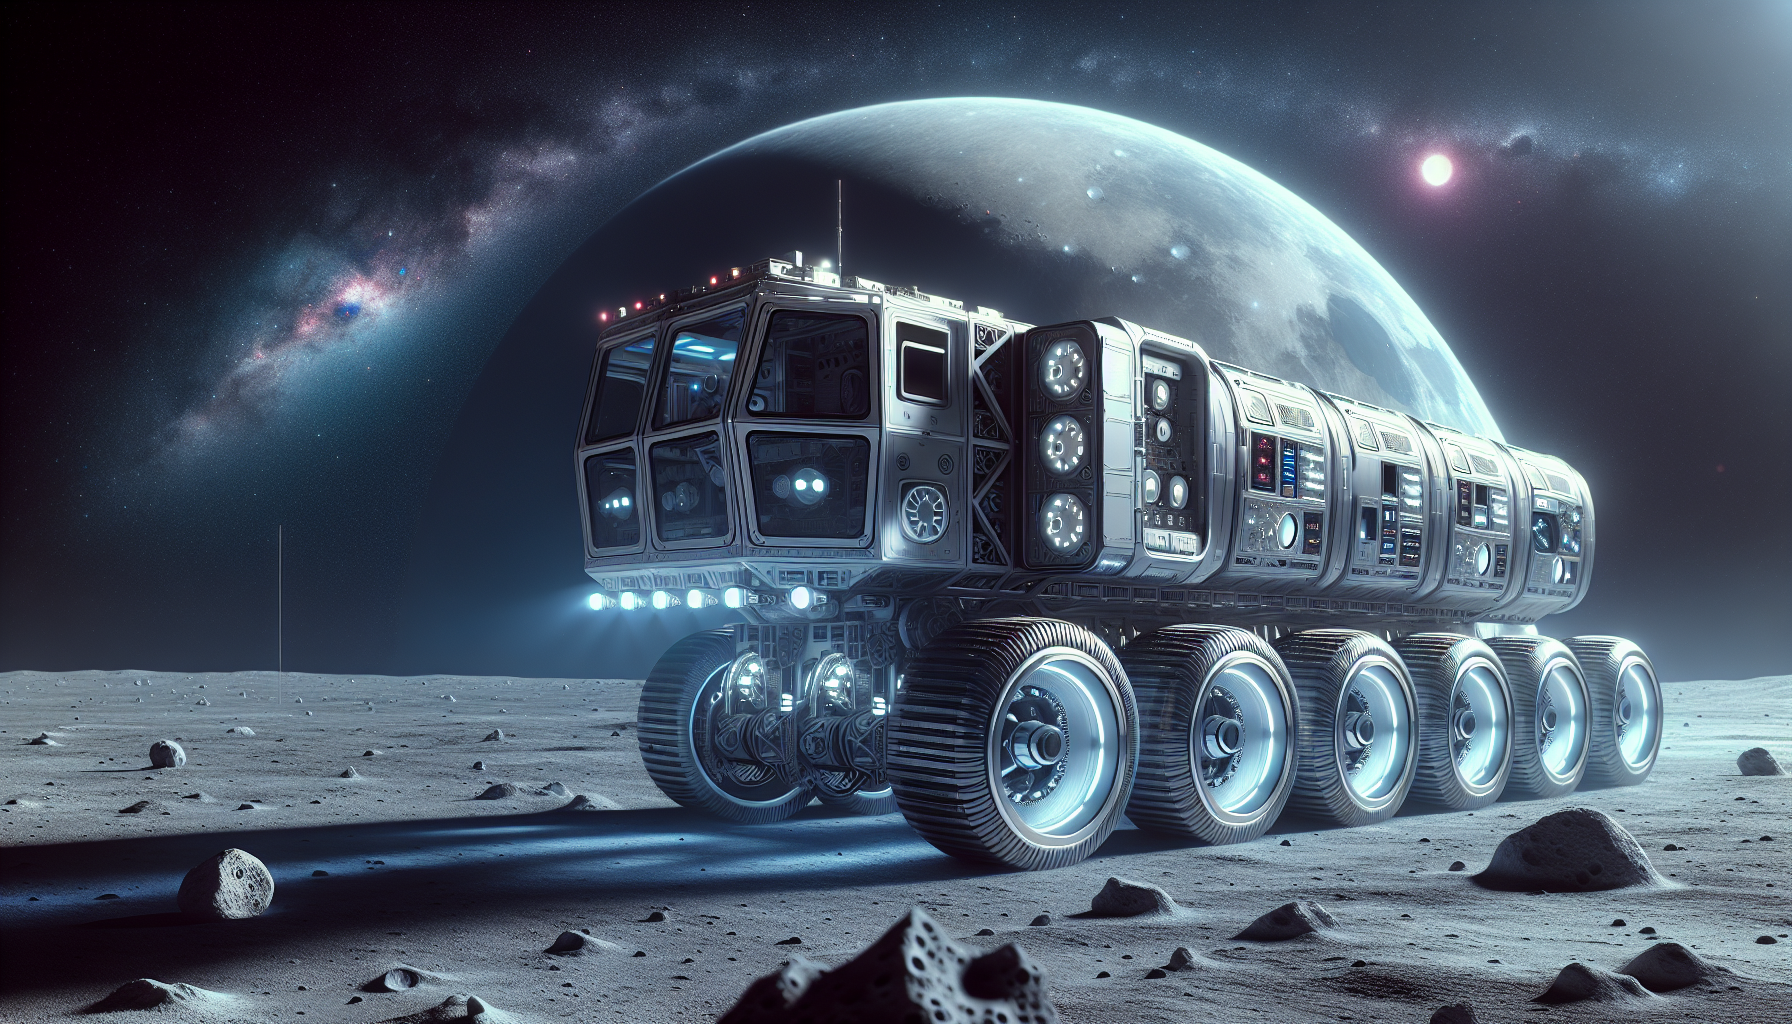 A Conceptual Lunar Vehicle Might Join NASA's Artemis V Astronauts on Their Mission to the Moon.